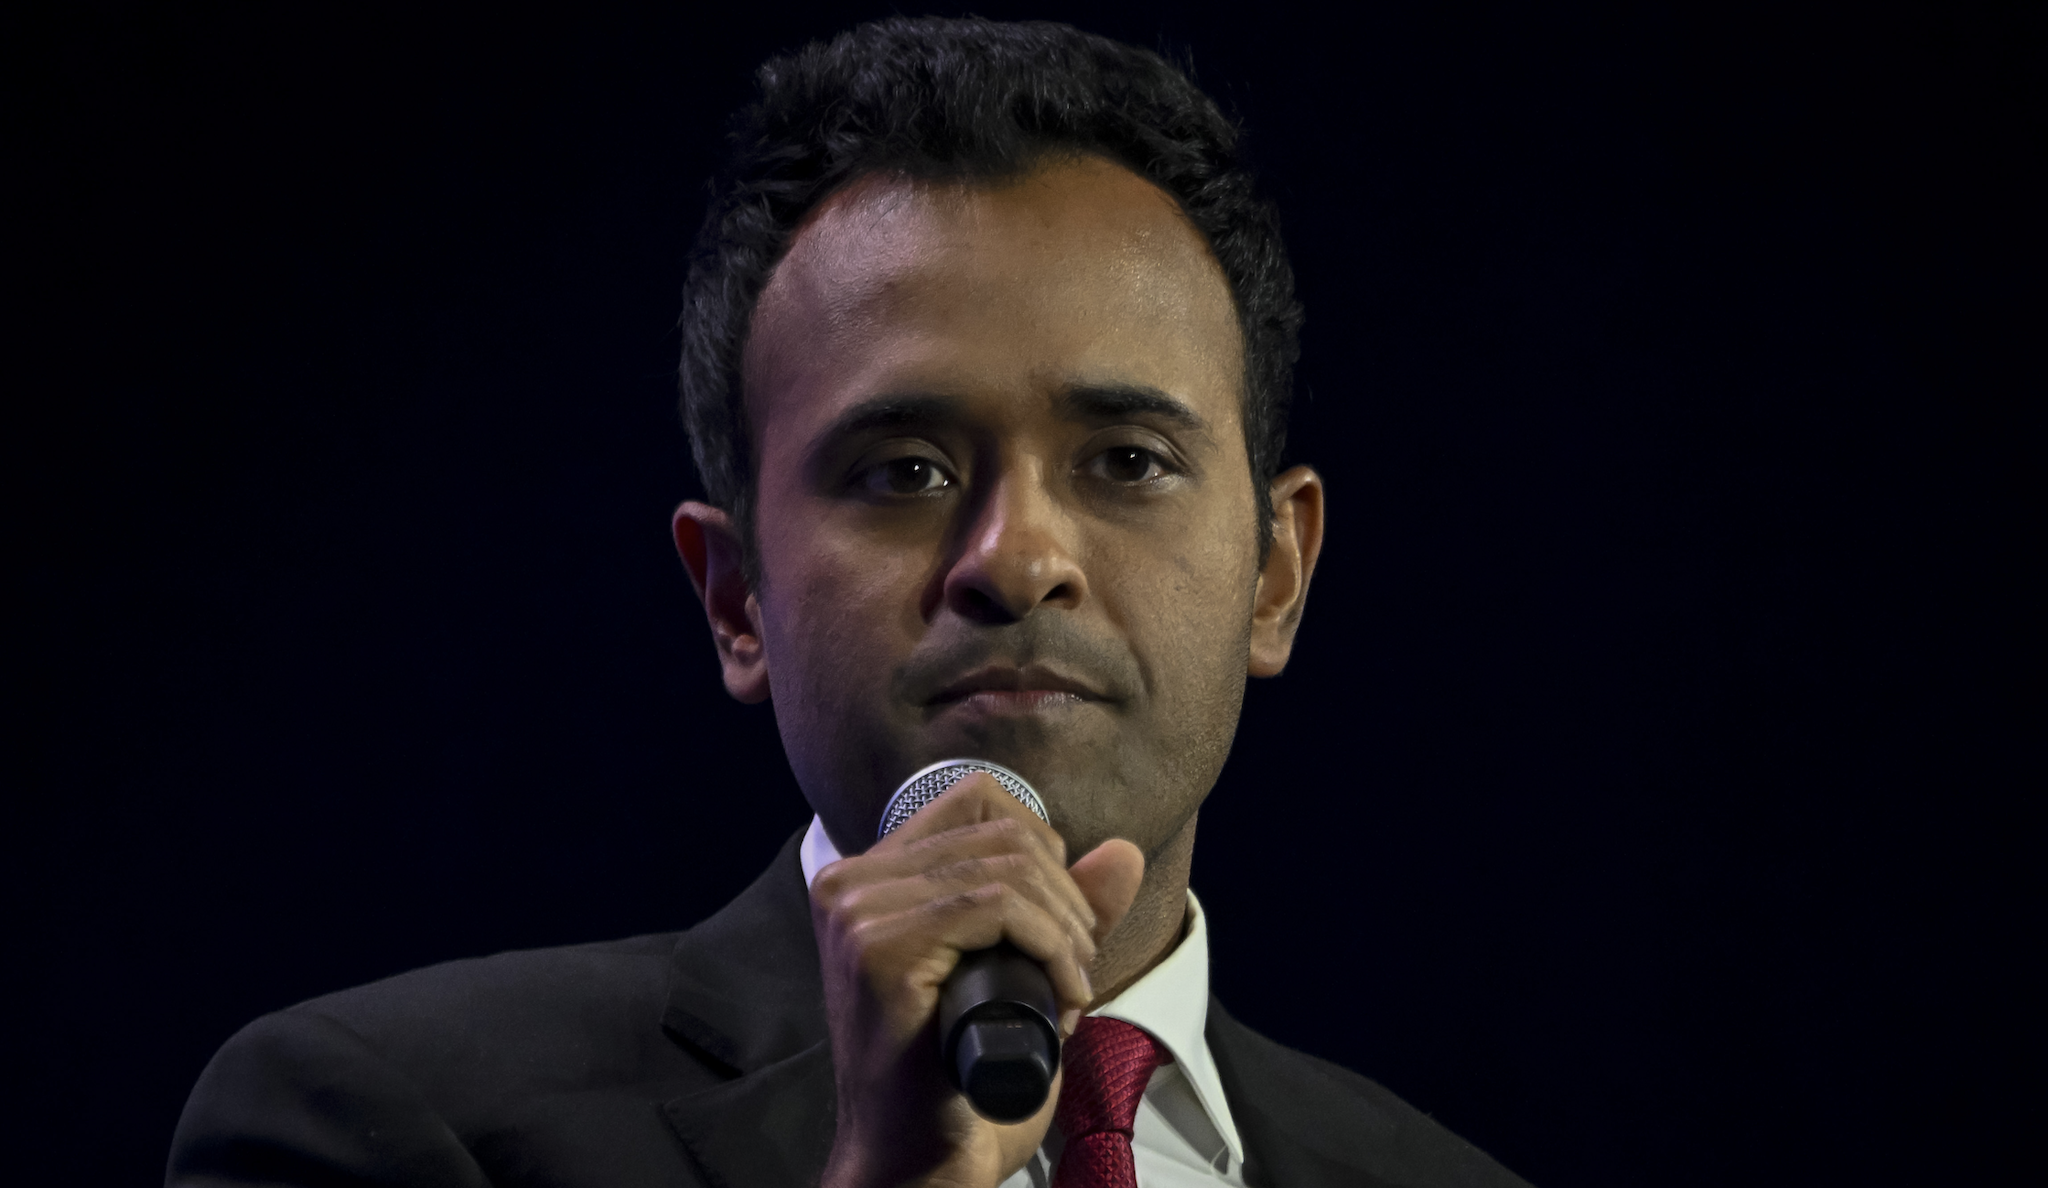 Vivek Ramaswamy, chairman and co-founder of Strive Asset Management, speaks at the Turning Point Action conference in West Palm Beach, Florida, US, on Saturday, July 15, 2023. The Federal Election Commission reports due Saturday for the second quarter of 2023 will also show which Republicans are mounting a serious challenge to former President Donald Trump for the GOP nomination.